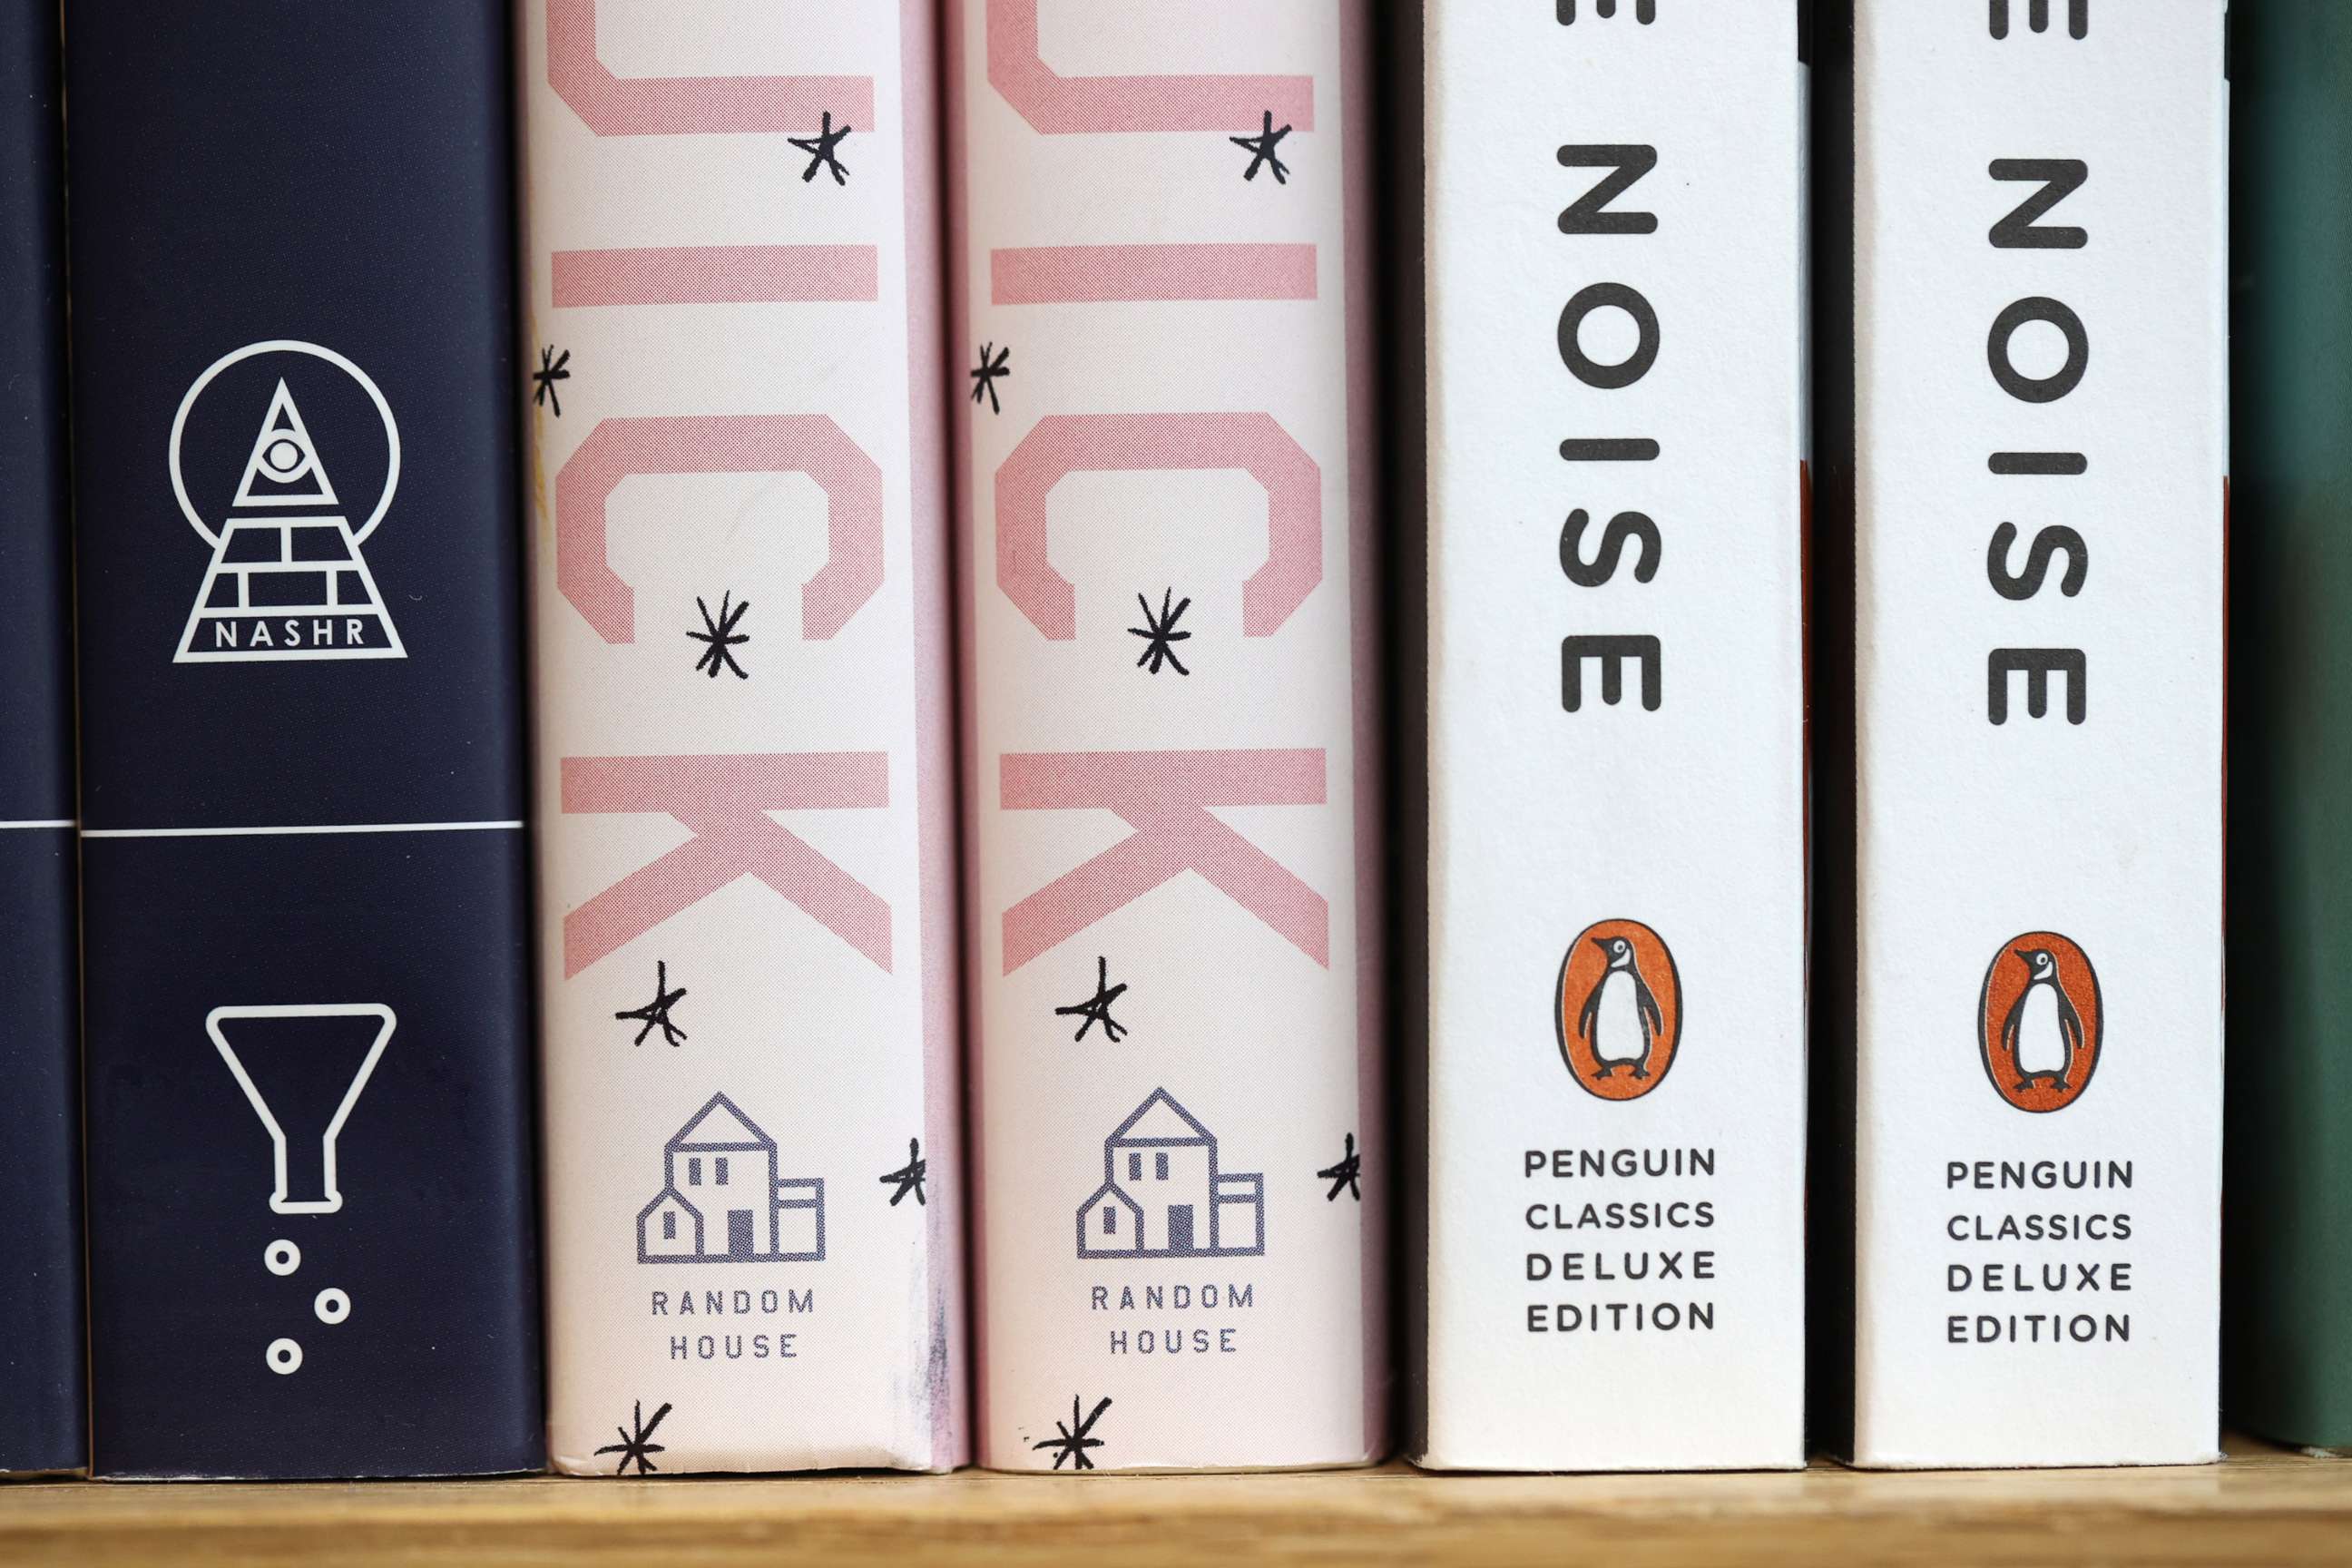 PHOTO: The Penguin and Random House logos are visible on the spines of books displayed on a shelf at Book Passage on Nov. 2, 2021 in Corte Madera, Calif.